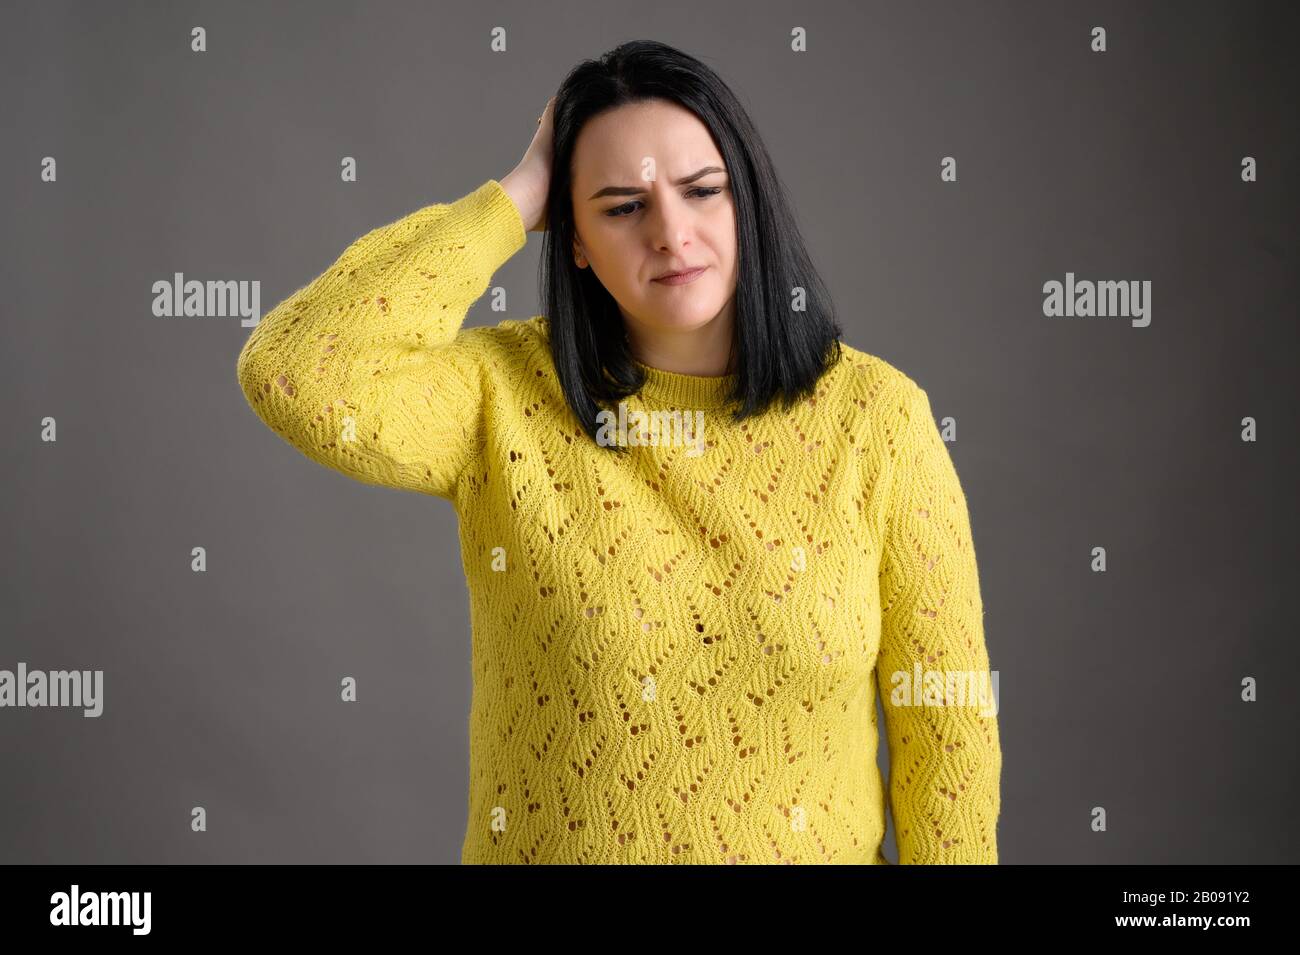 Young woman with black hair dressed casually in a yellow sweater has headaches posing an isolated grey background Stock Photo